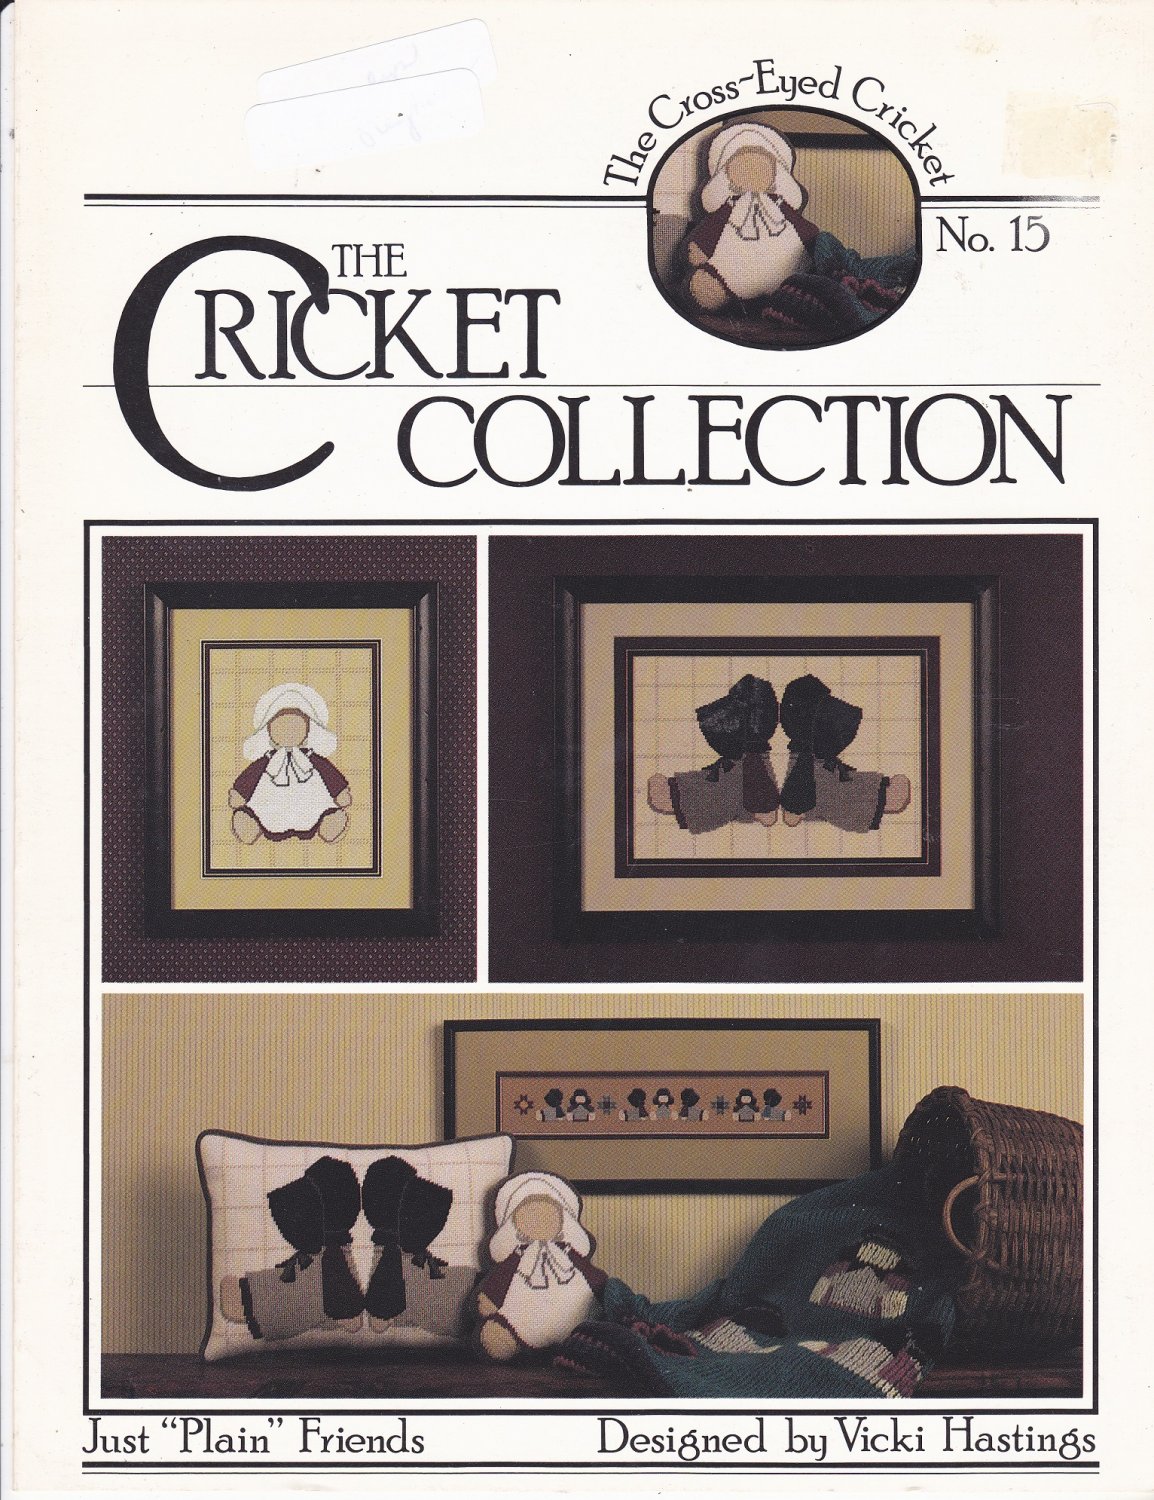 The Cricket collection вышивка крестом. Крикет коллекшн вышивка схемы. Pat Rogers counted collection схема. Cross eyed Cricket вышивка. Just collection